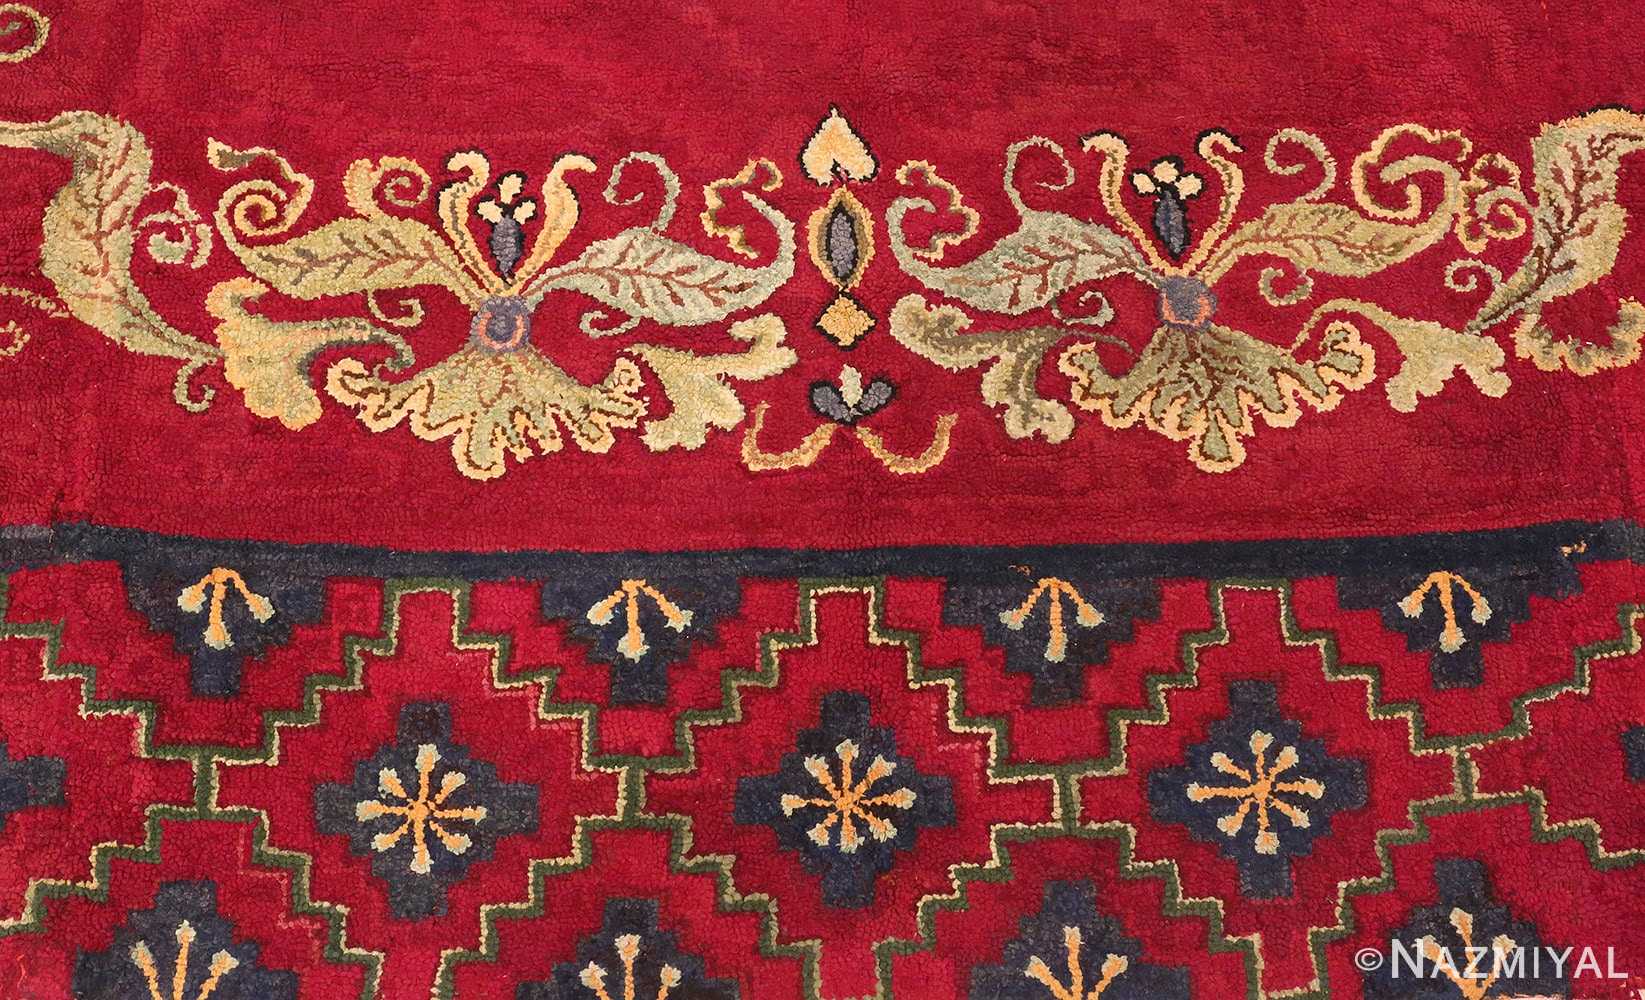 Picture of the border of the red Medallion Design Antique American Hooked Rug #70059 from Nazmiyal Antique Rugs in NYC